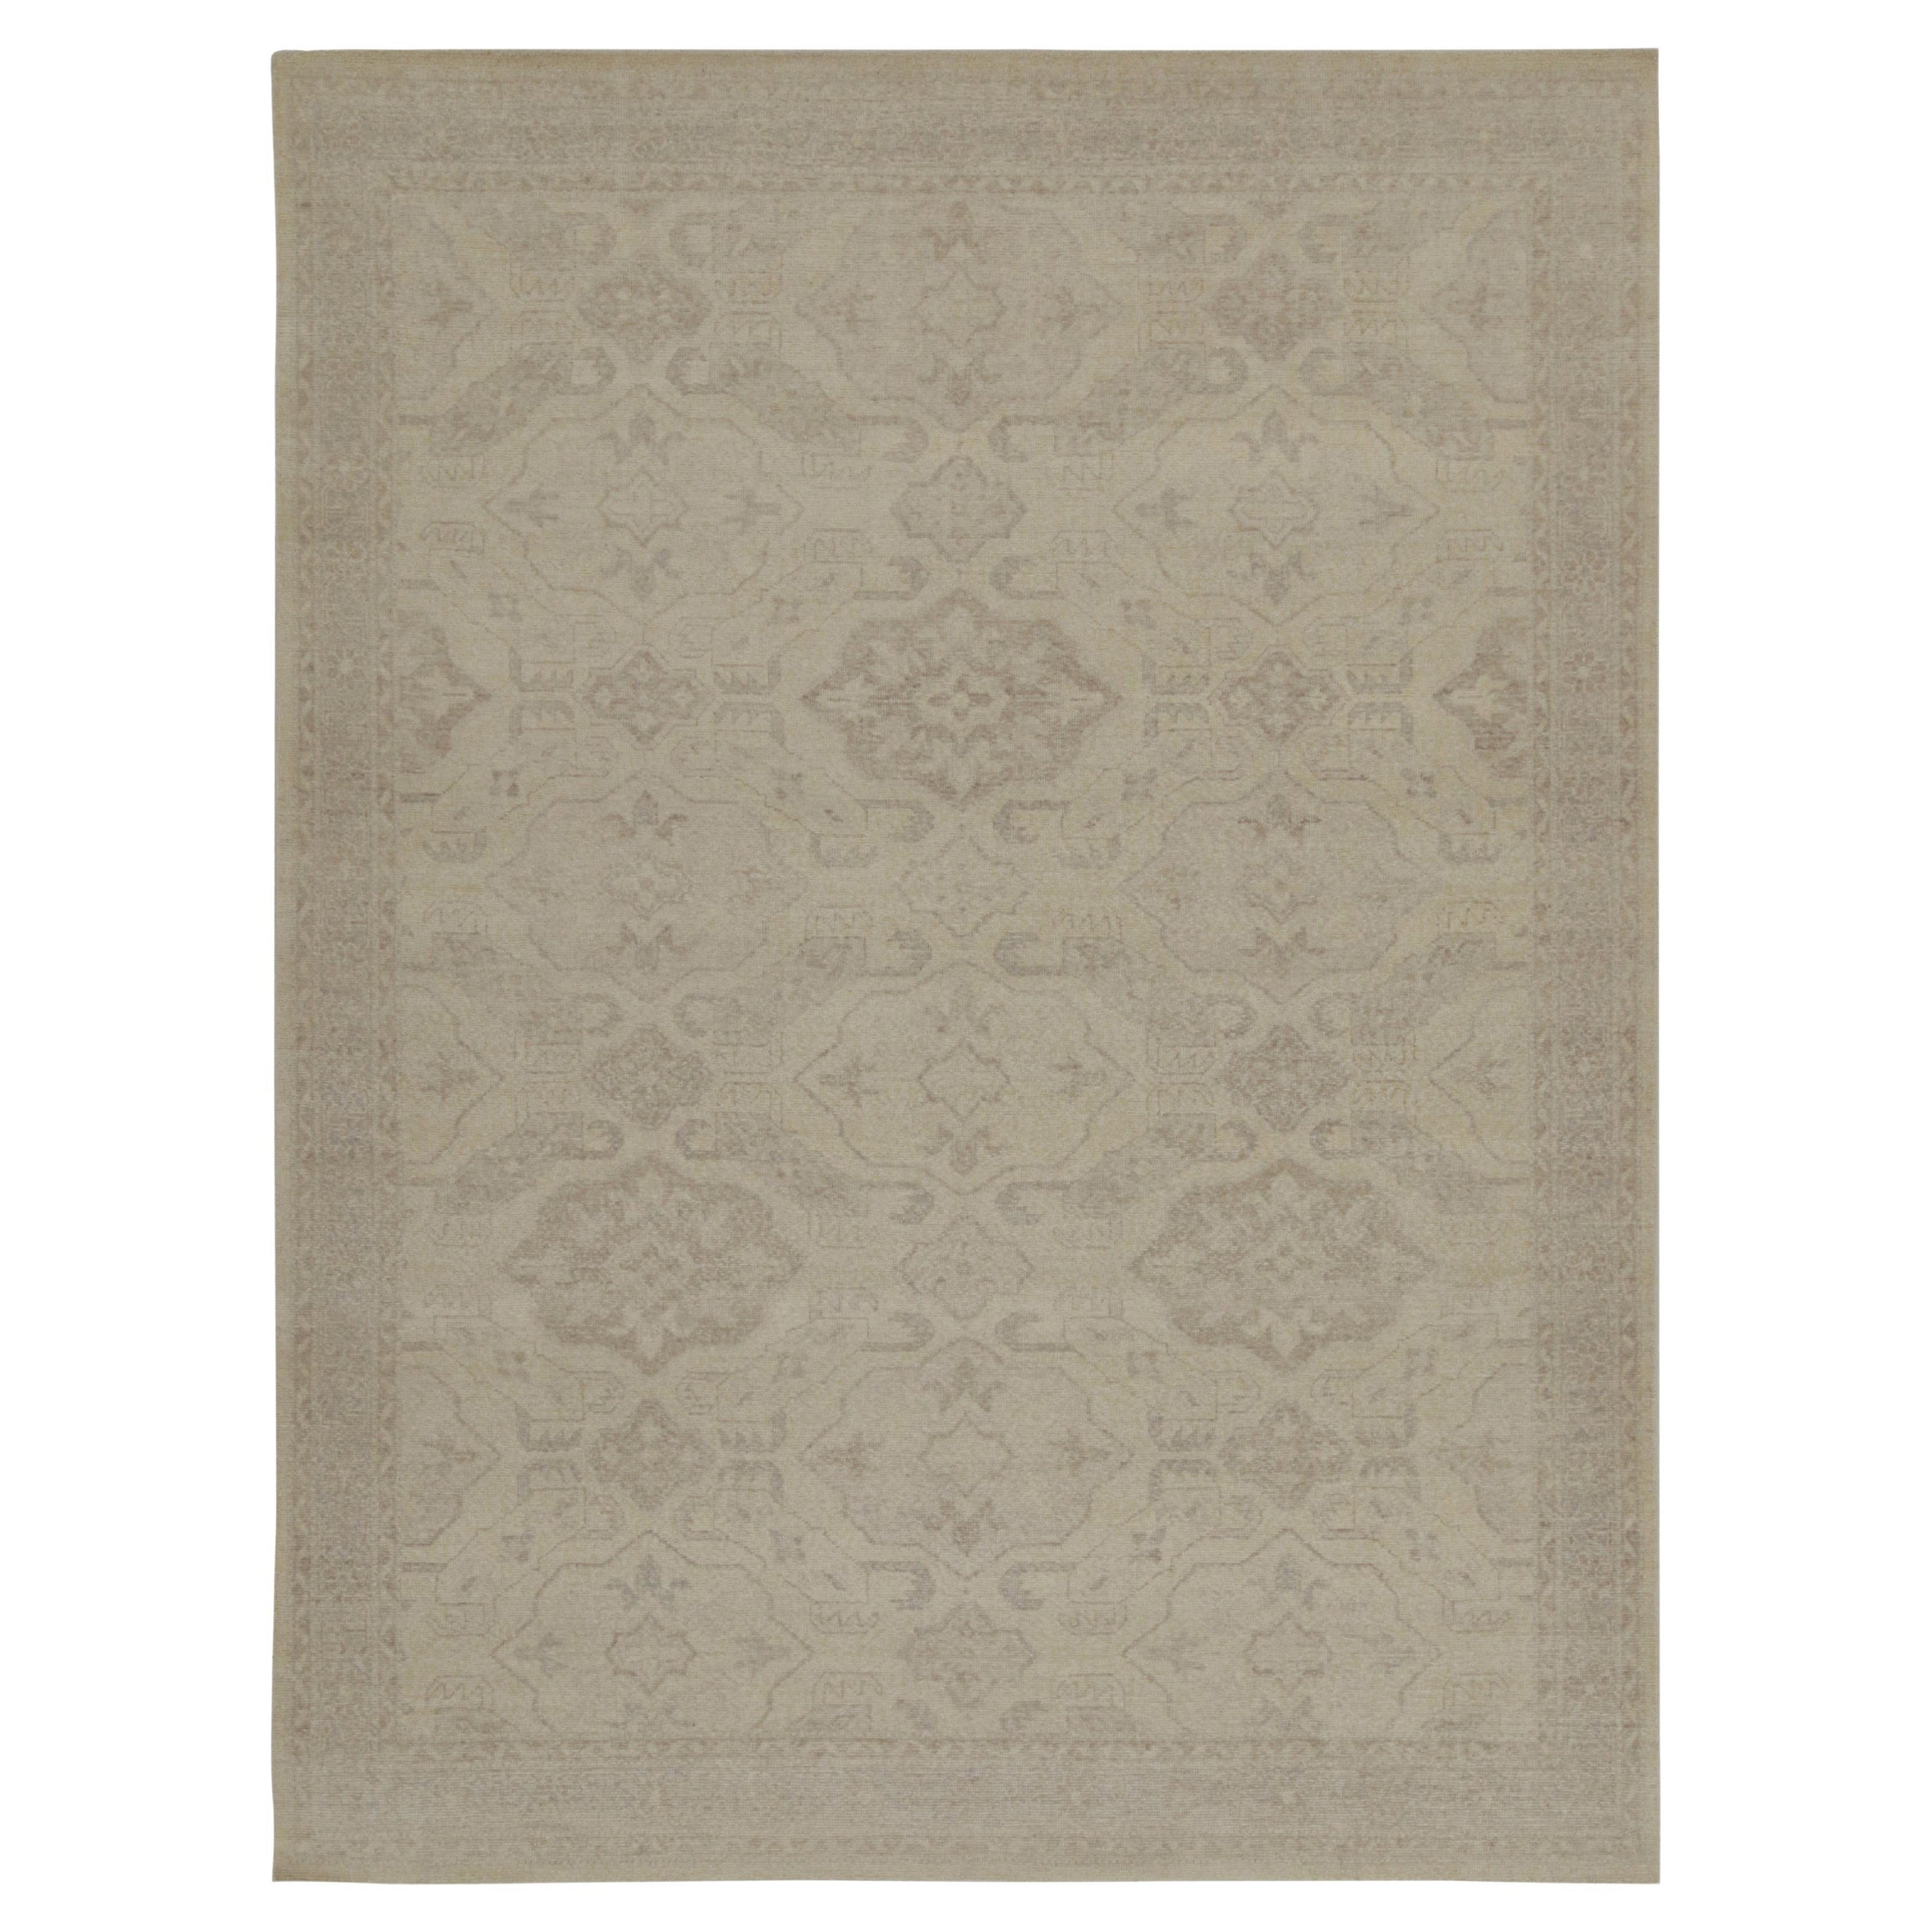 Rug & Kilim’s Distressed Tribal Style Rug in Greige Geometric Patterns For Sale